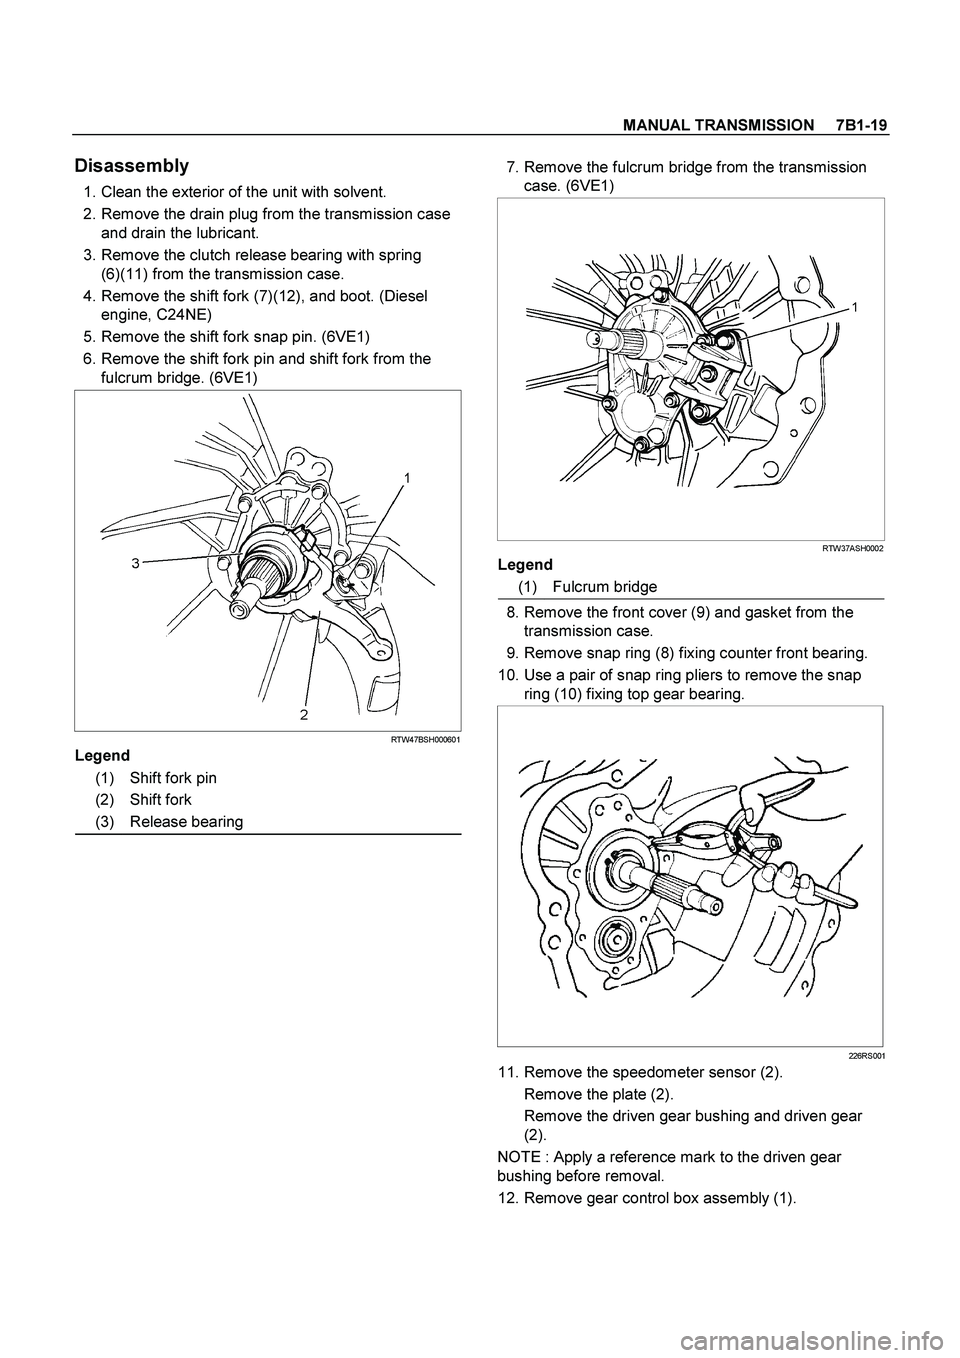 ISUZU TF SERIES 2004  Workshop Manual MANUAL TRANSMISSION     7B1-19
 
Disassembly 
  1. Clean the exterior of the unit with solvent. 
  2. Remove the drain plug from the transmission case 
and drain the lubricant. 
  3. Remove the clutch